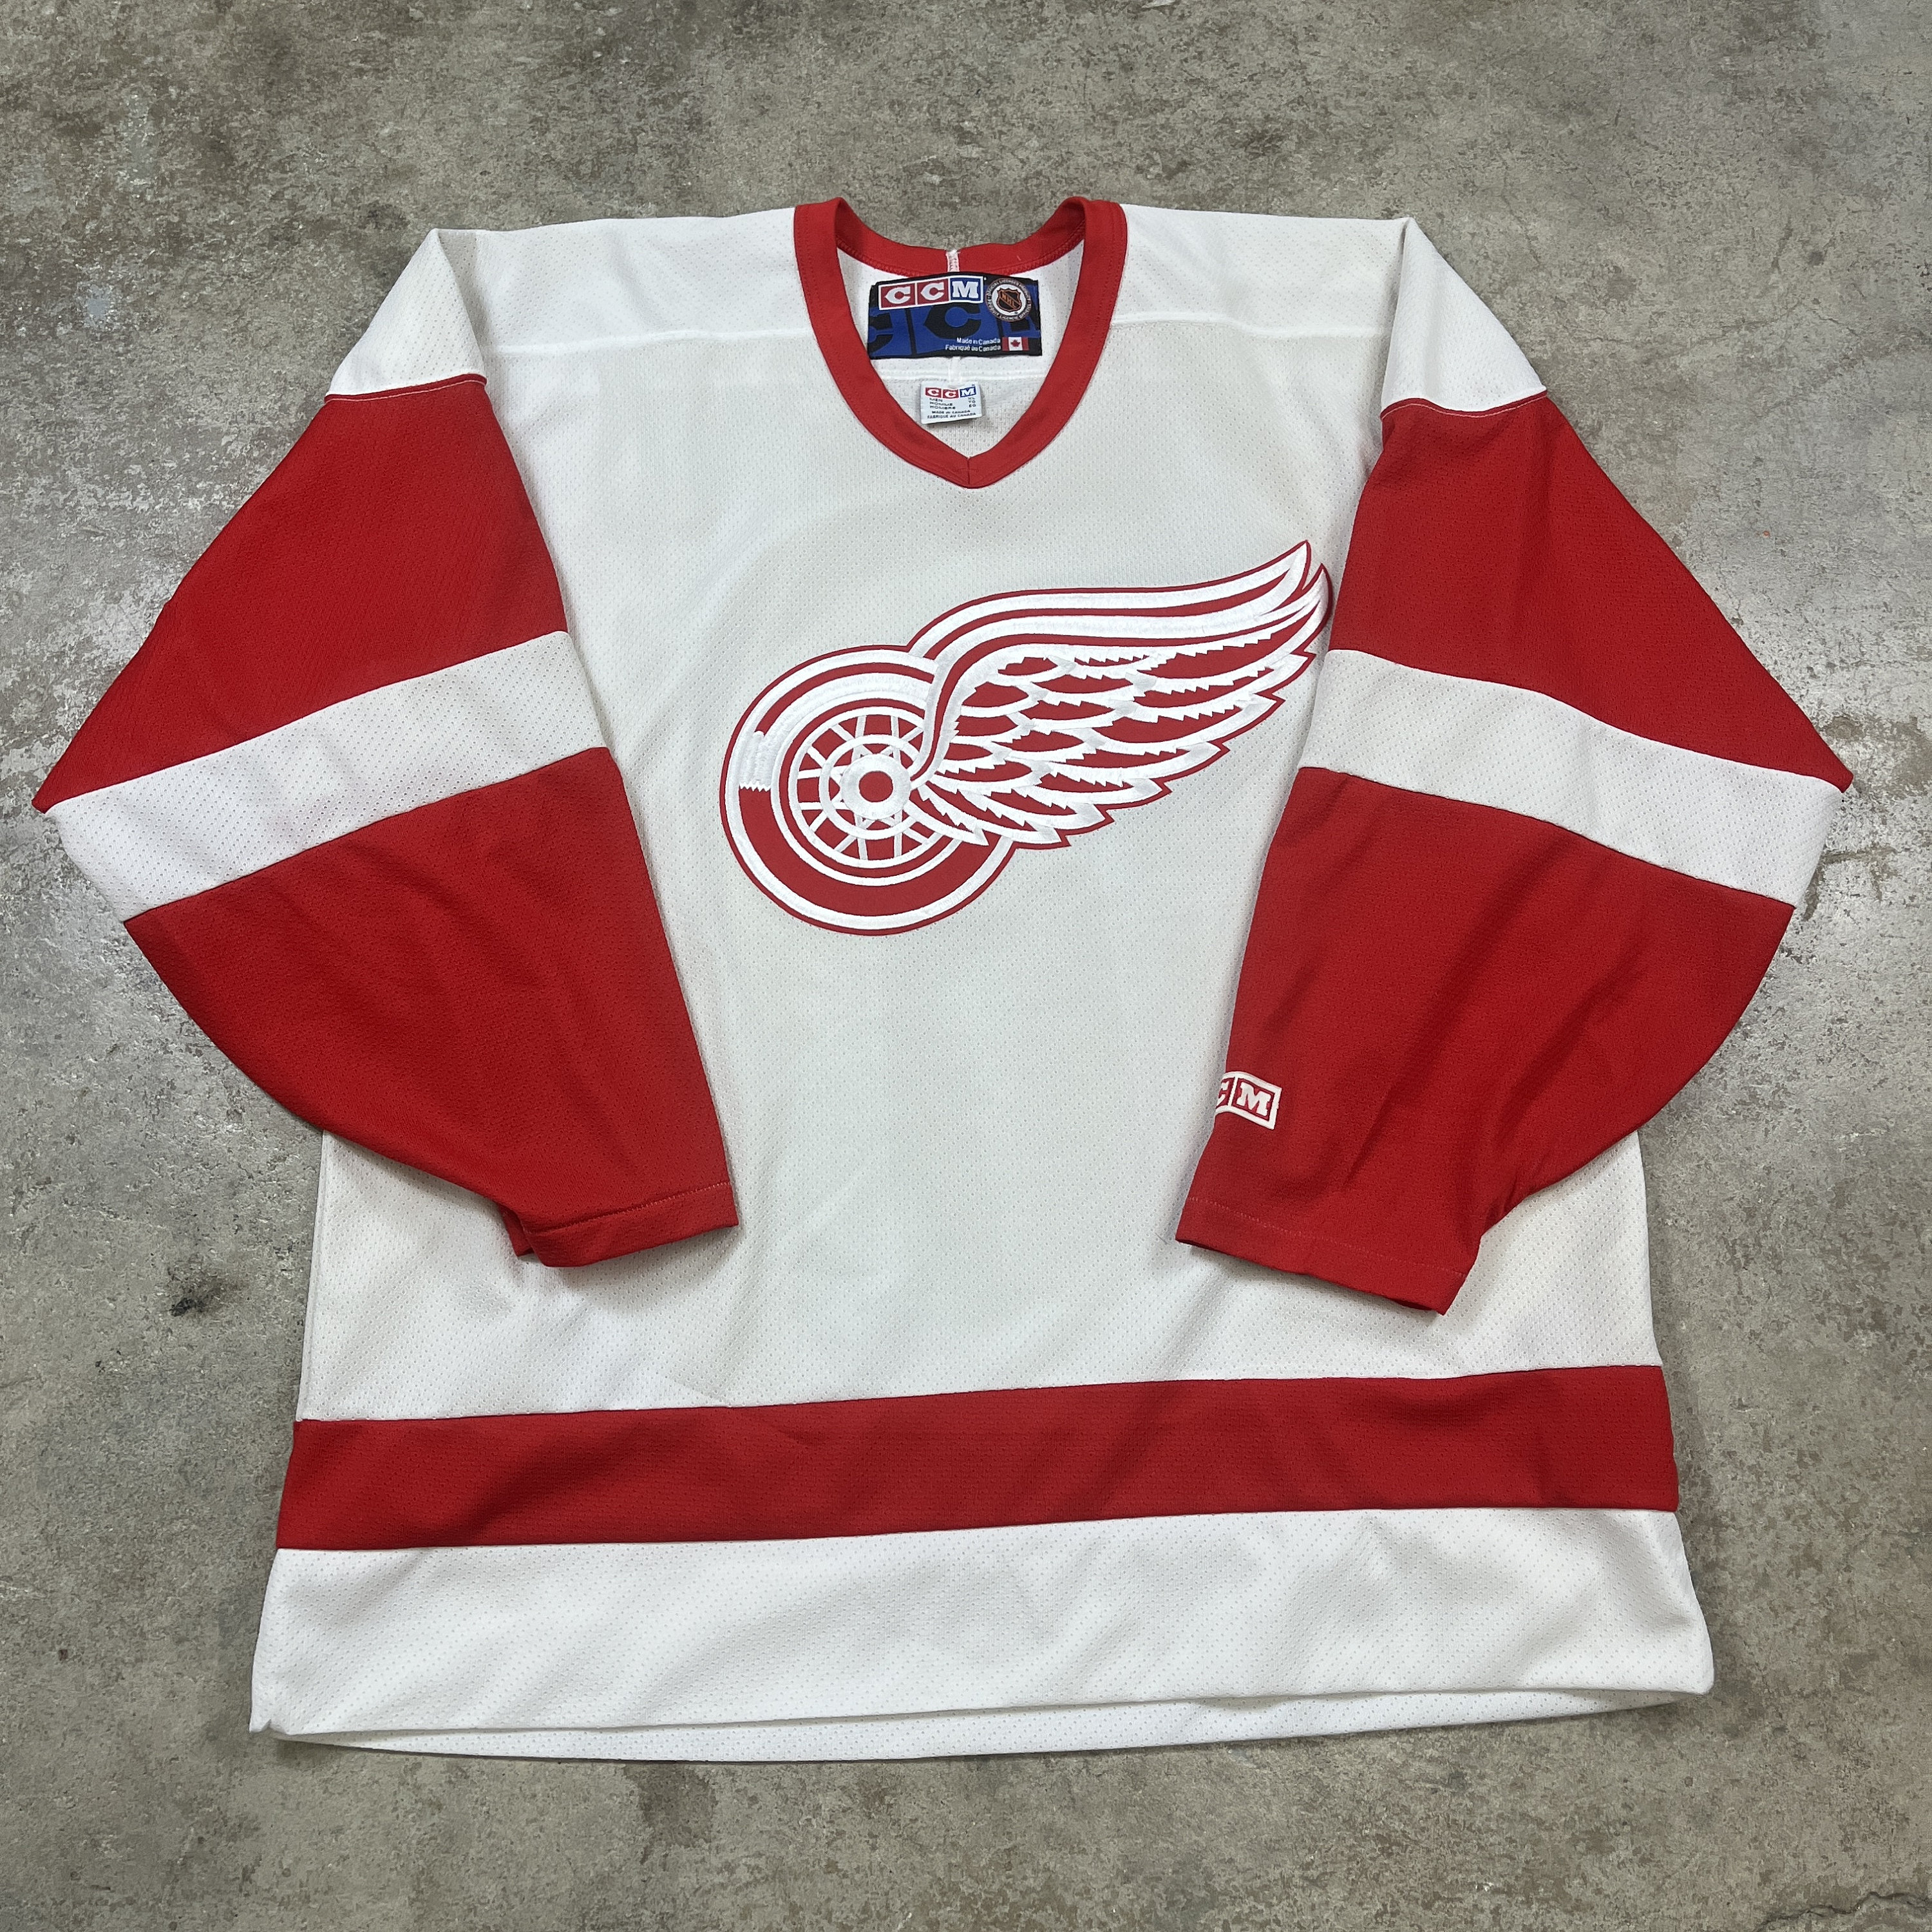 Detroit, Red Wings Hockey Jersey by CCM, Boys Large/XL